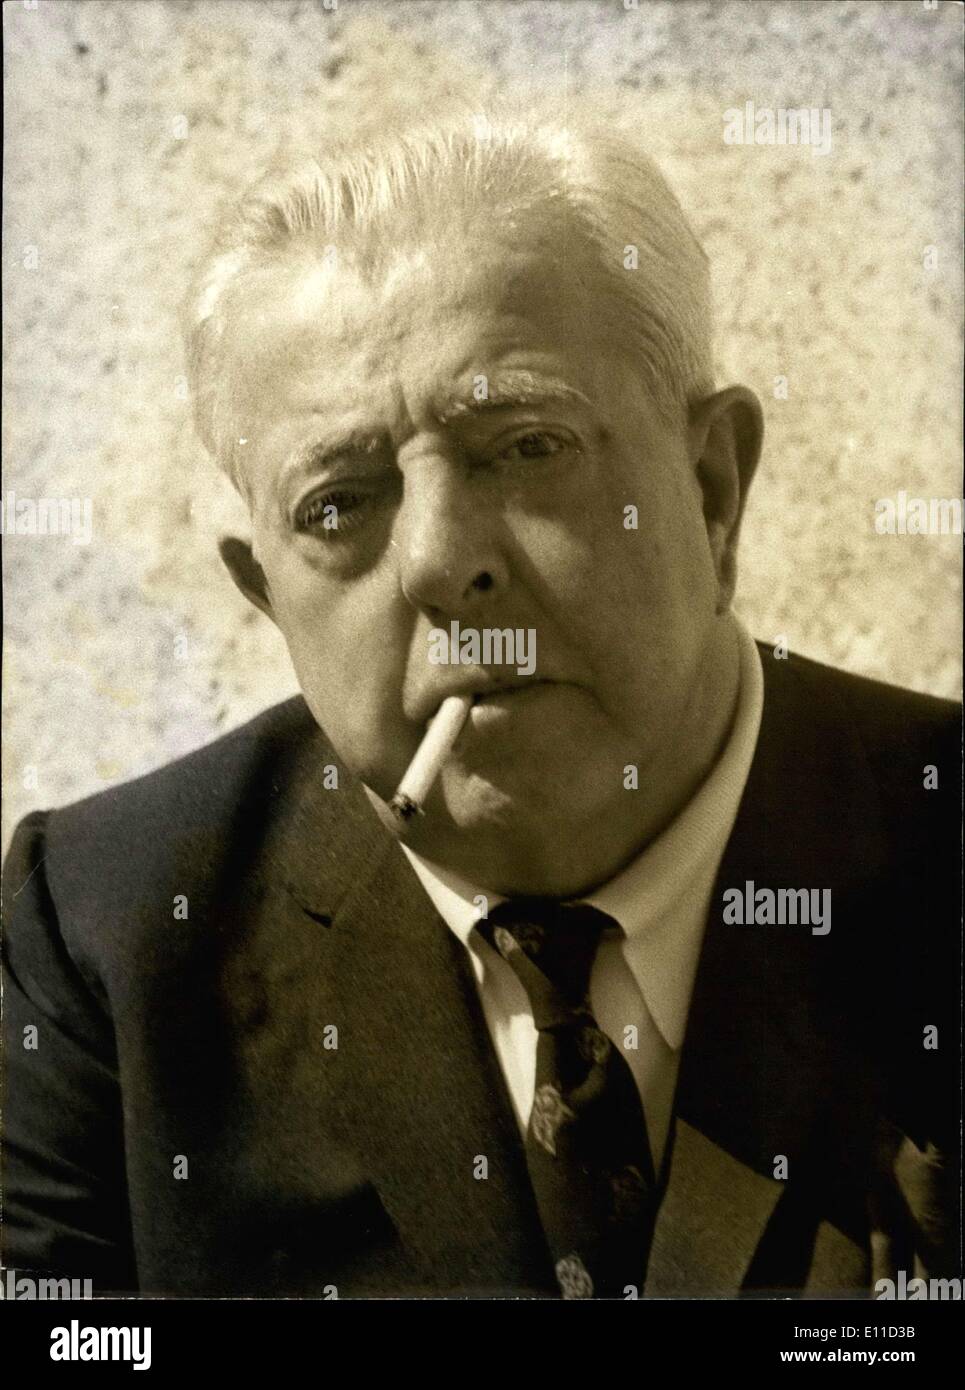 Apr. 12, 1977 - Jacques Prevert died at 77 years old last night on his property in Omonville-La-Petite. Lots of people are mourning his death. He wrote scripts for more than 70 movies and he wrote successful songs, likes ''The Dead Leaves,'' which he wrote with Kosma. Stock Photo